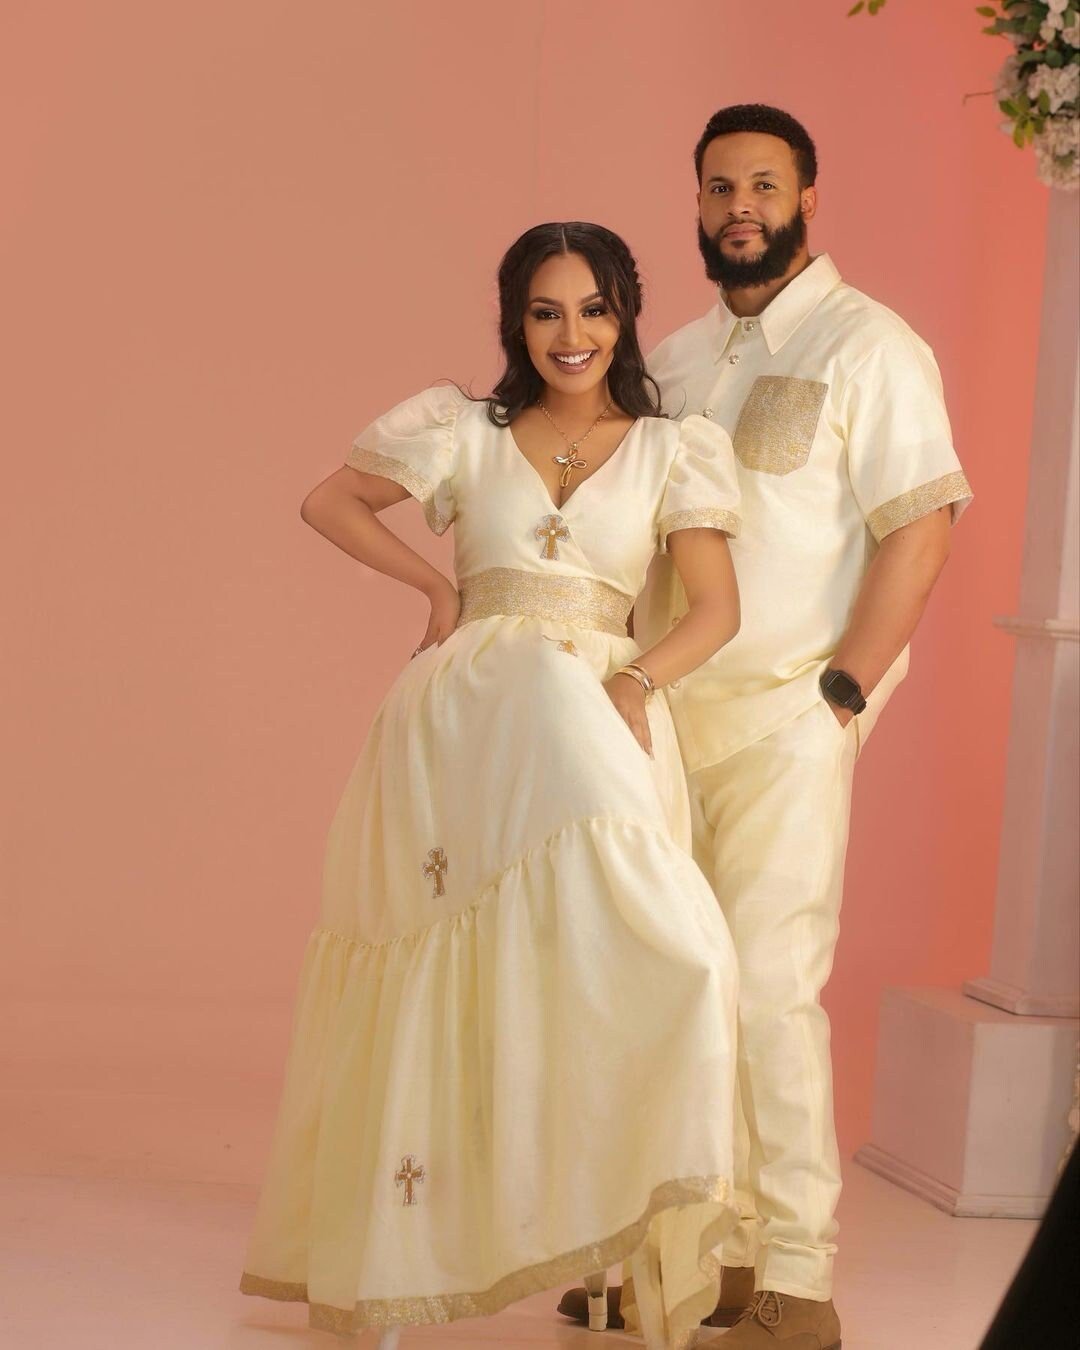 Exquisite Couples' Habesha Clothing with Gorgeous Menen Fabric, couples clothing, ሀበሻ